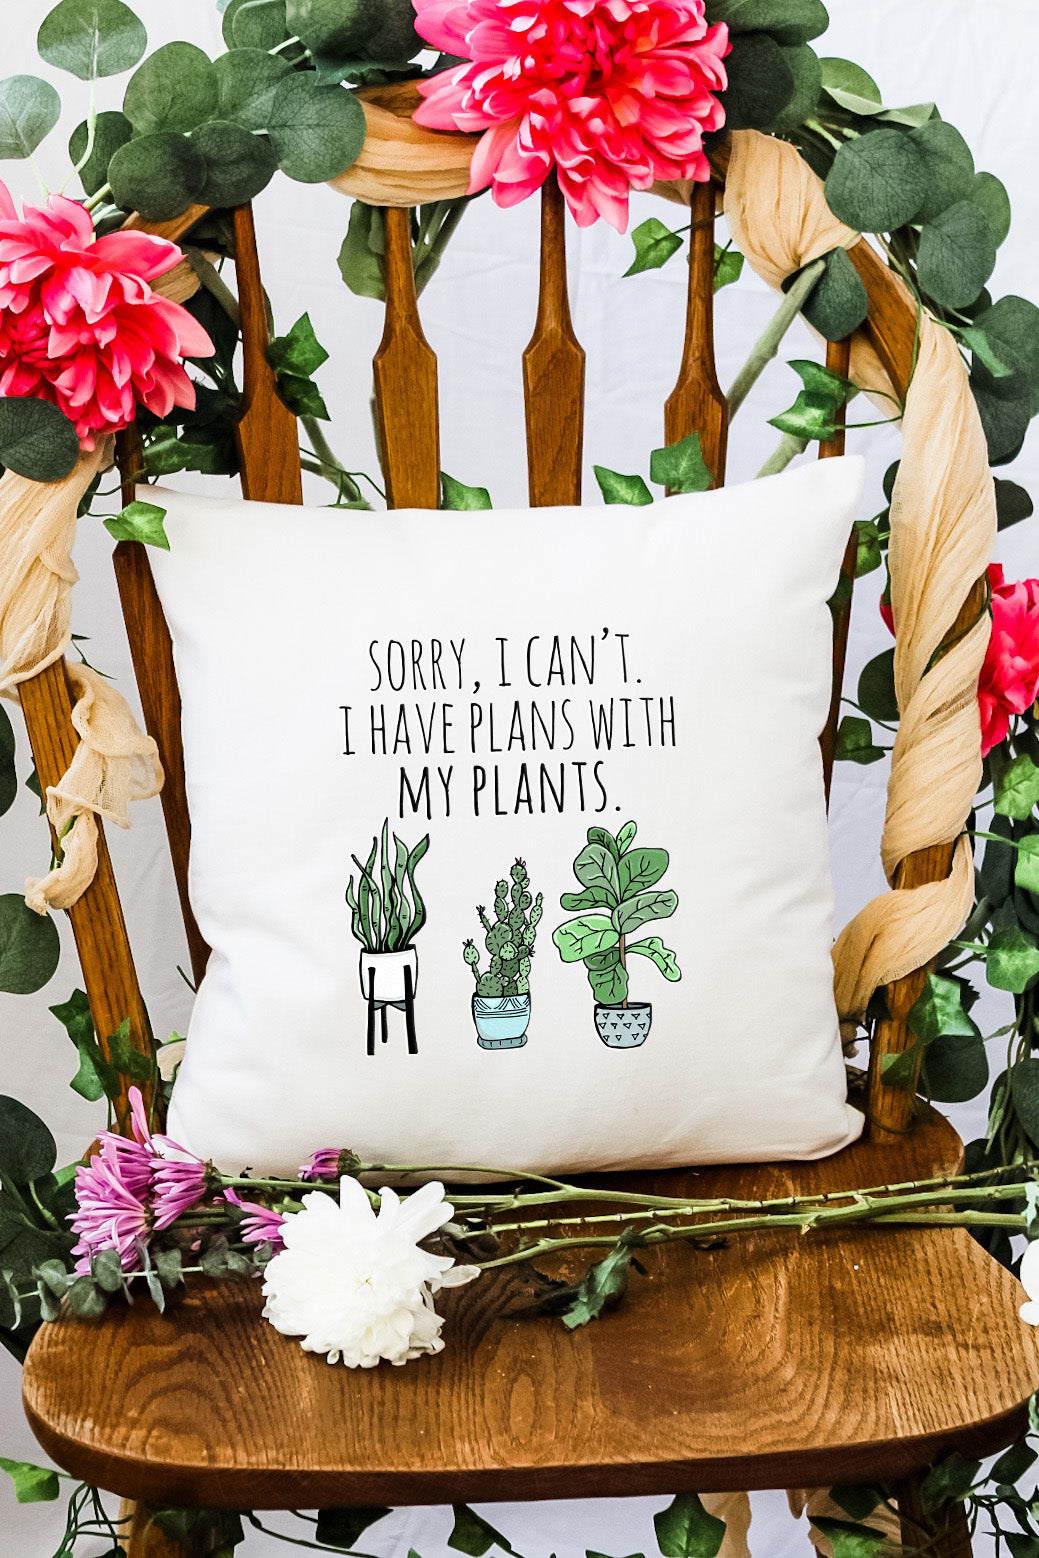 Sorry, I Can't. I Have Plans With My Plans - Decorative Throw Pillow - MoonlightMakers